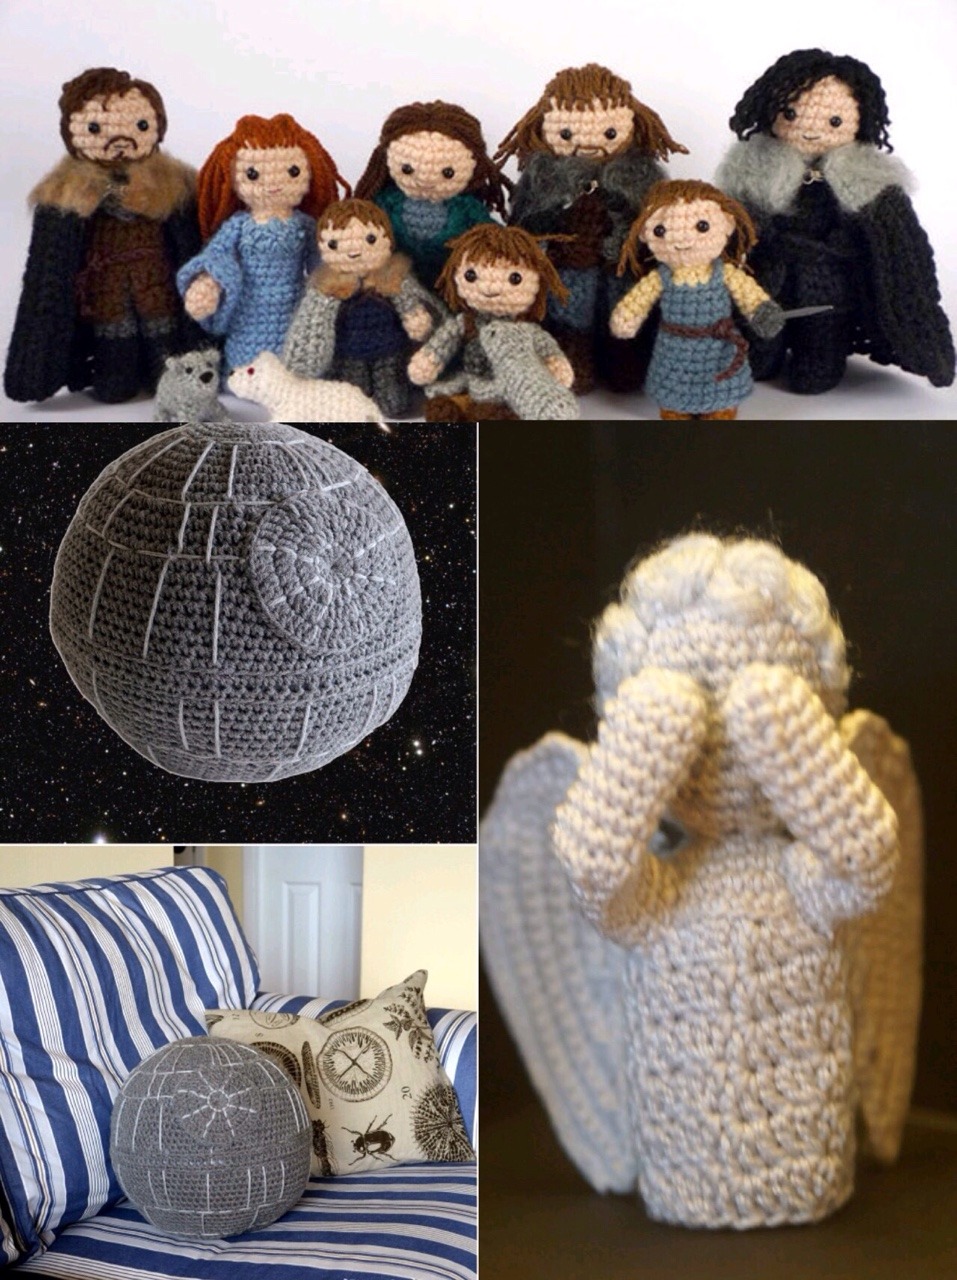 Crochet level - genius.  From  http://guff.com/23-geeky-crochet-creations-thatll-leave-you-in-stitches